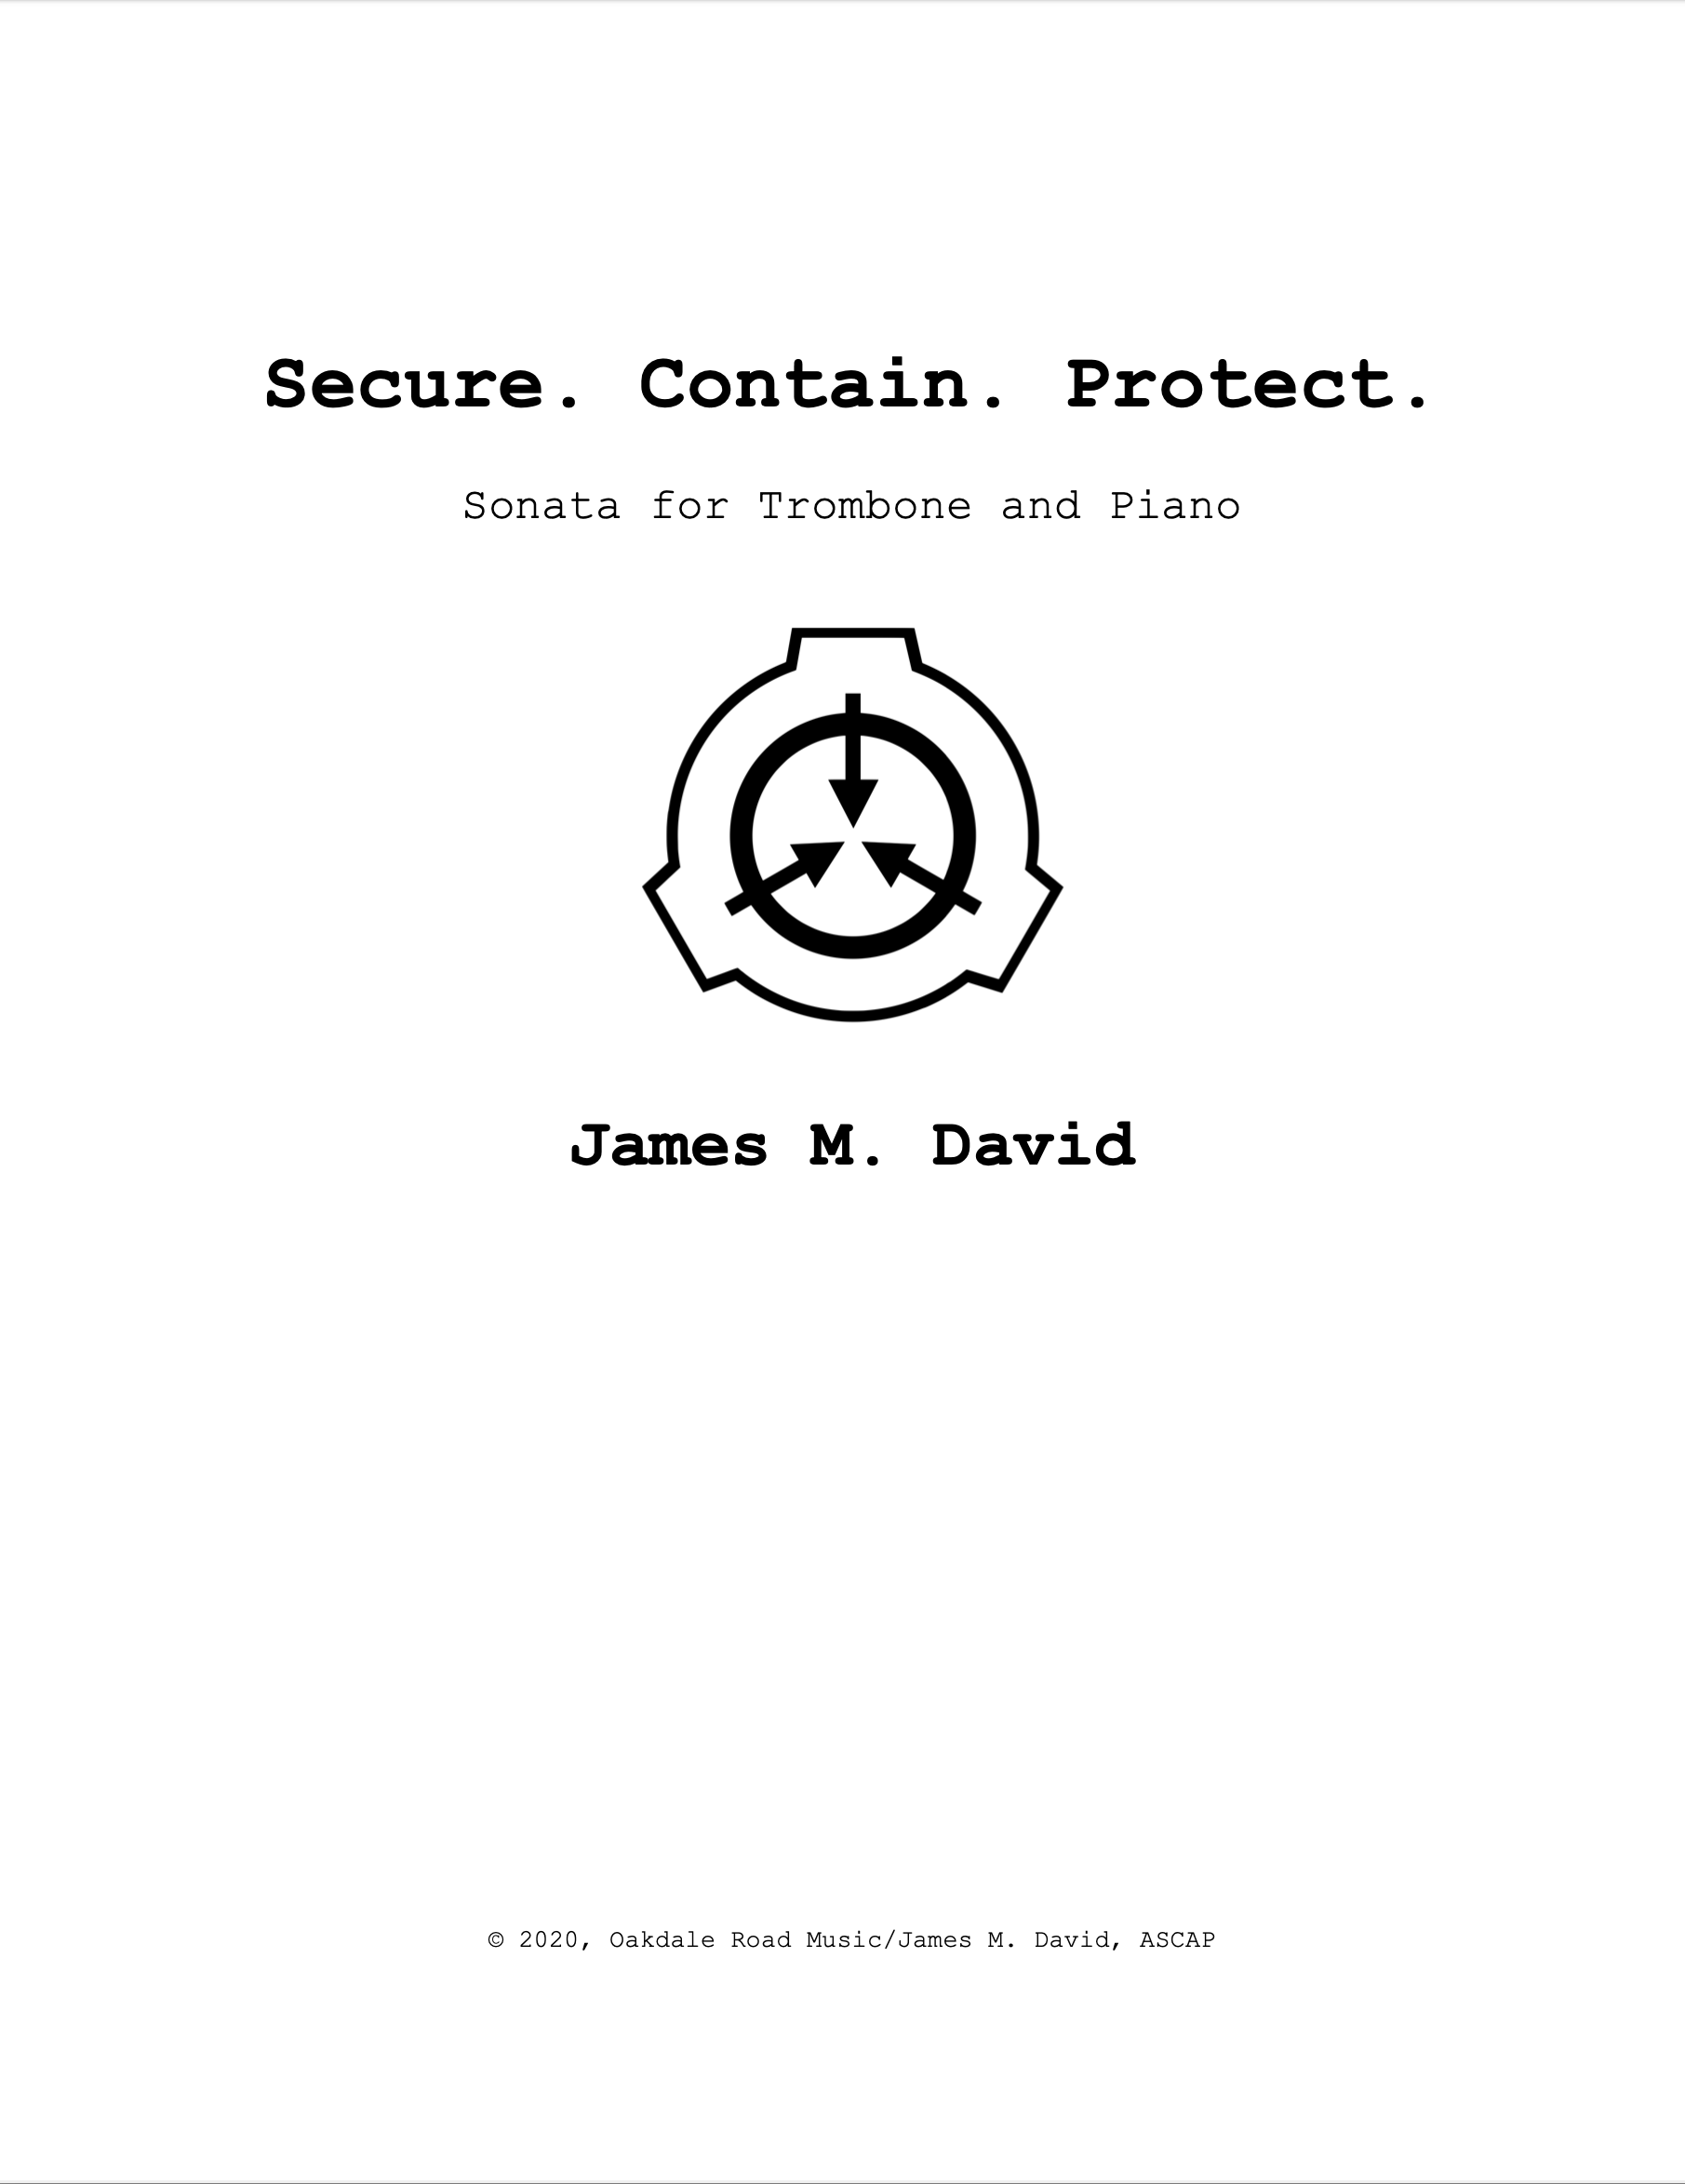 Secure.Contain.Protect by James David